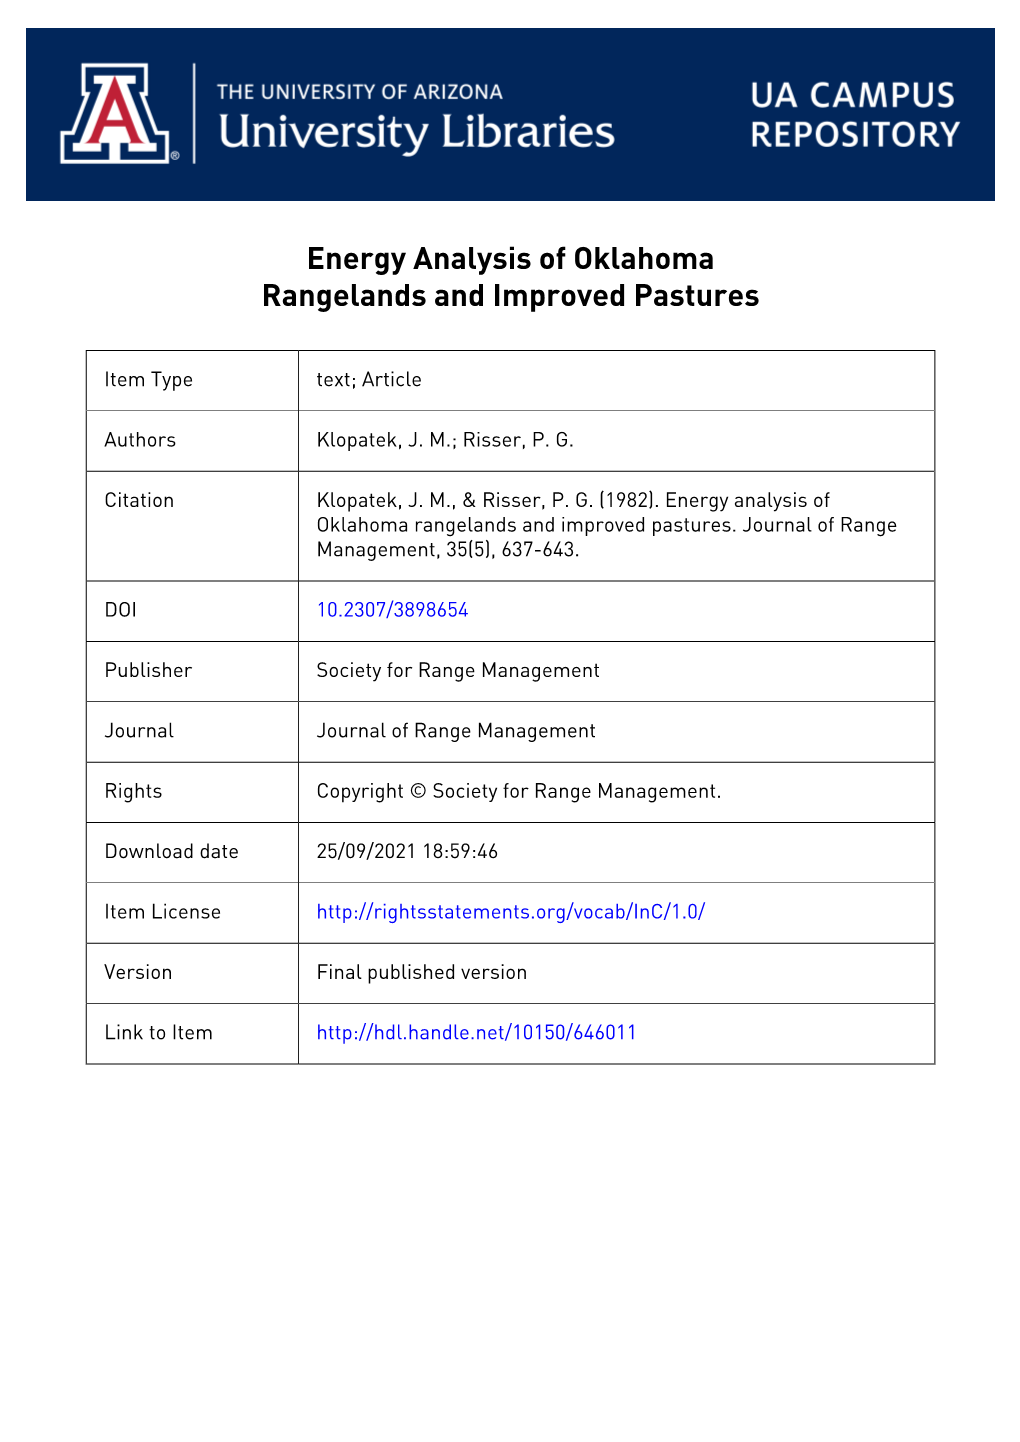 Energy Analysis of Oklahoma Rangelands and Improved Pastures